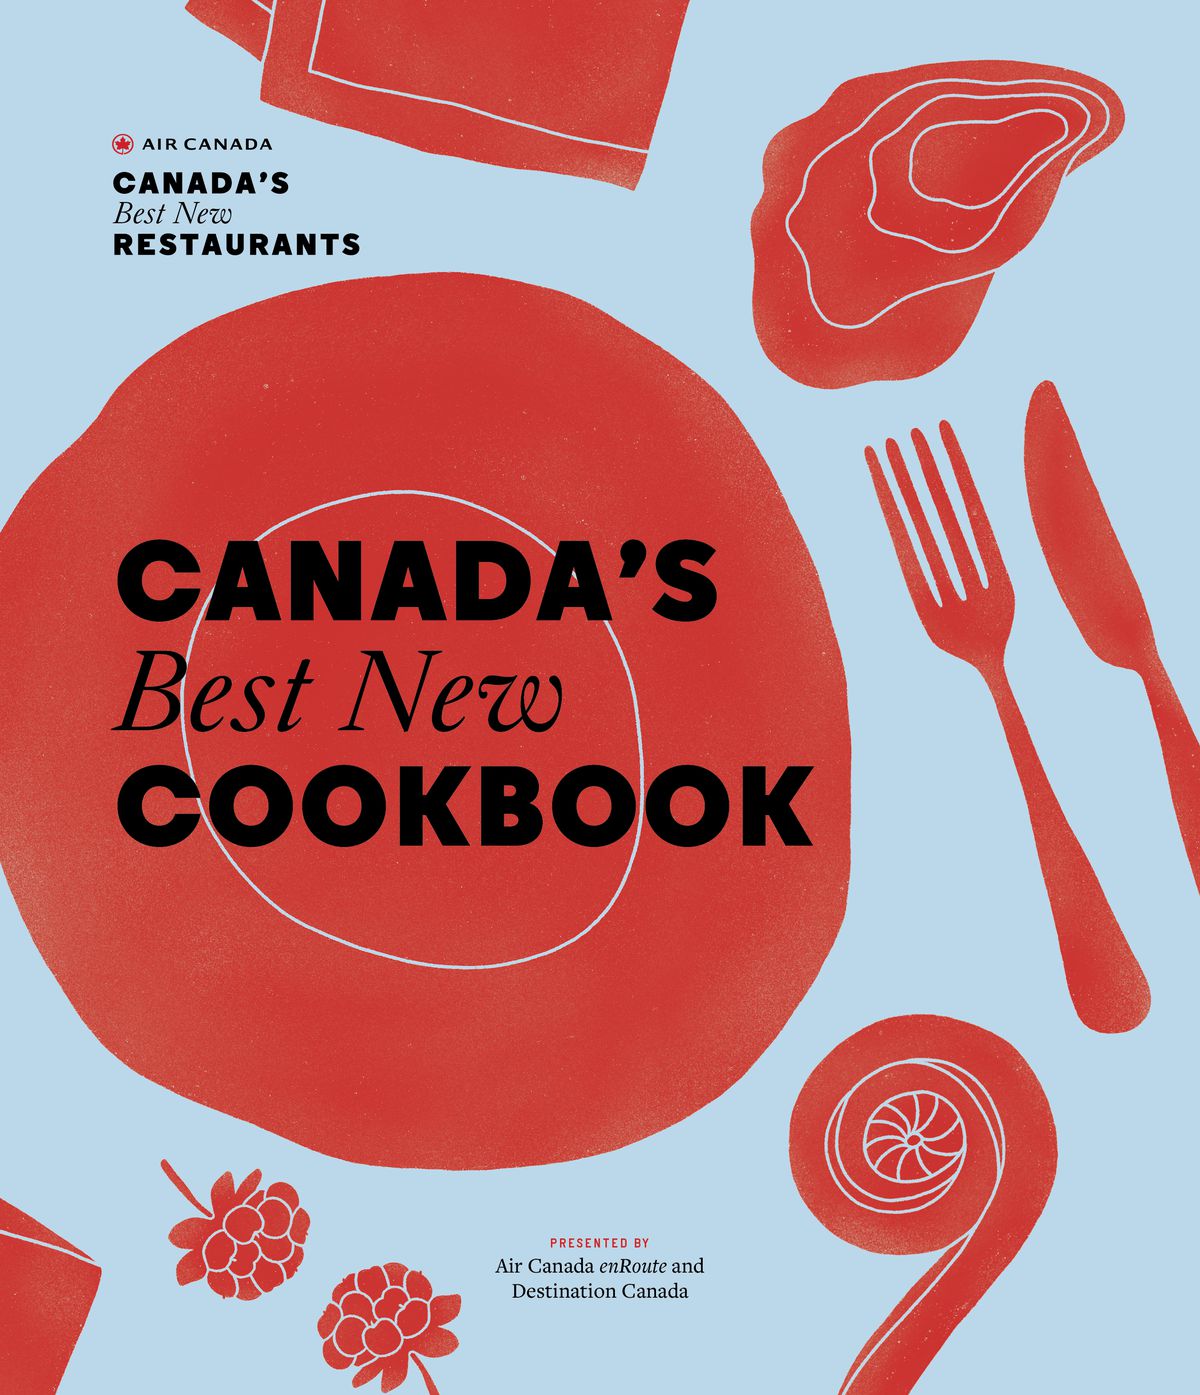 illustrated blue and red book cover that says “Canada’s Best New Cookbook”.